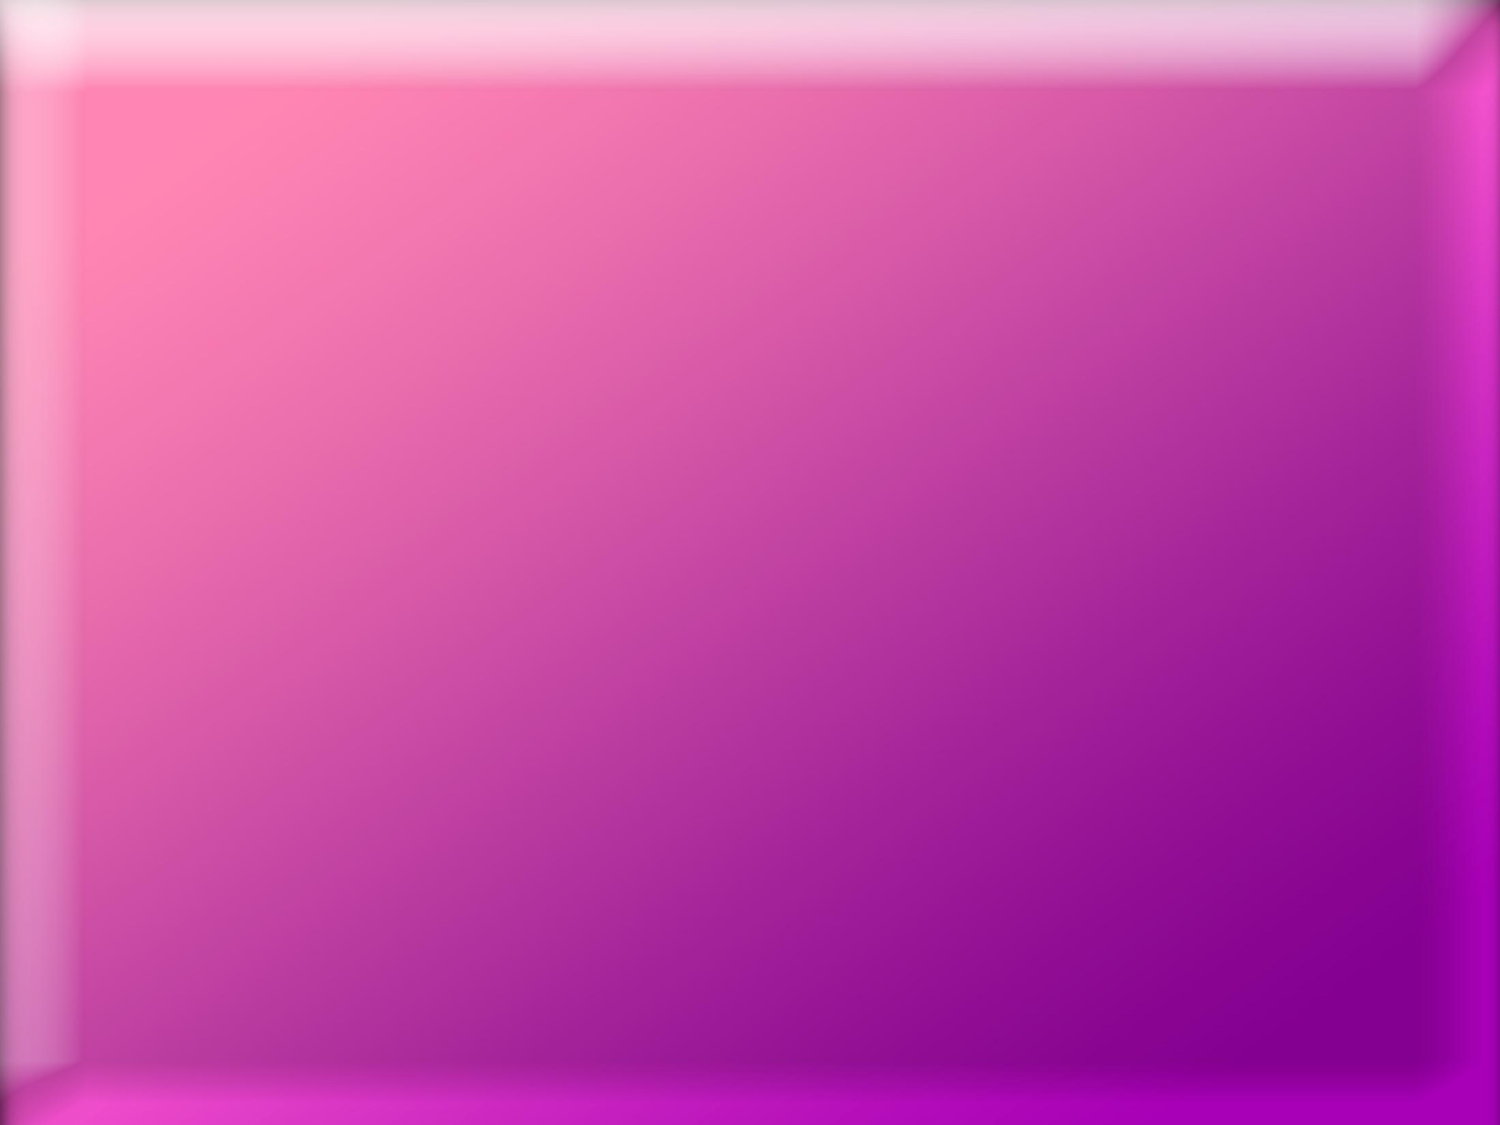 Free Powerpoint Template Pink Purple Background by BrittanyGibbons